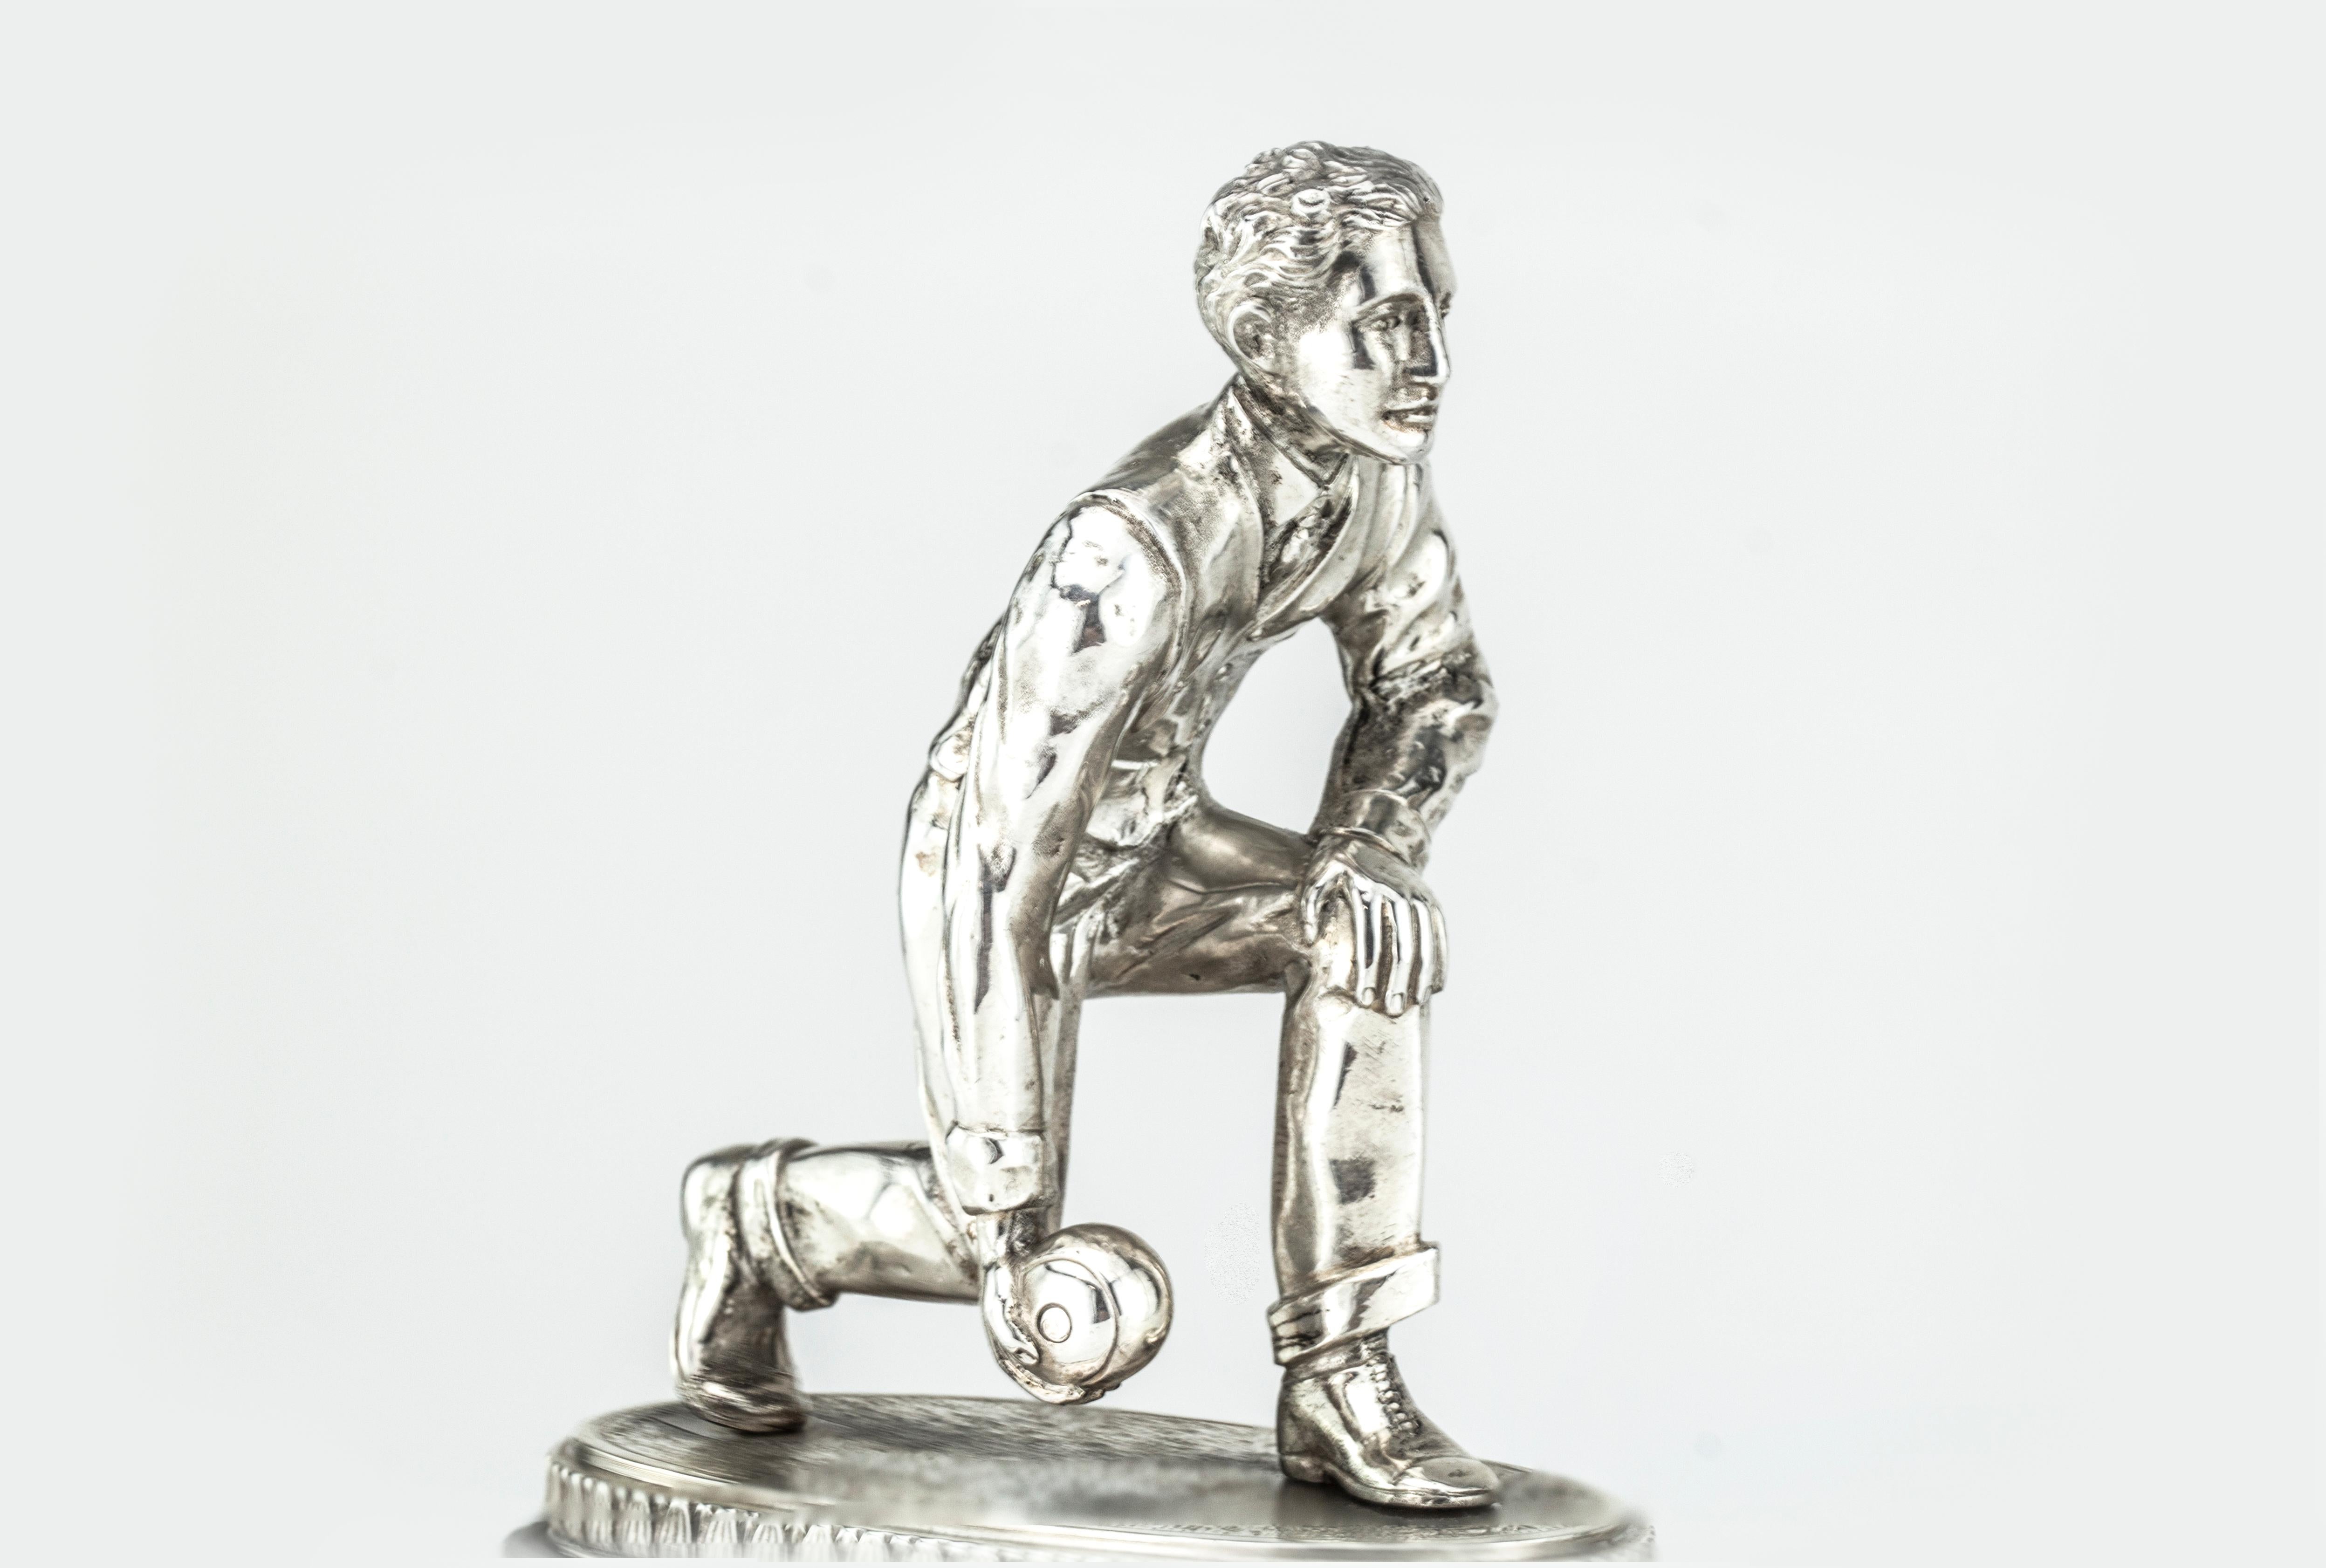 British Silver Statue 'Bowling Player' with a Wooden Base For Sale